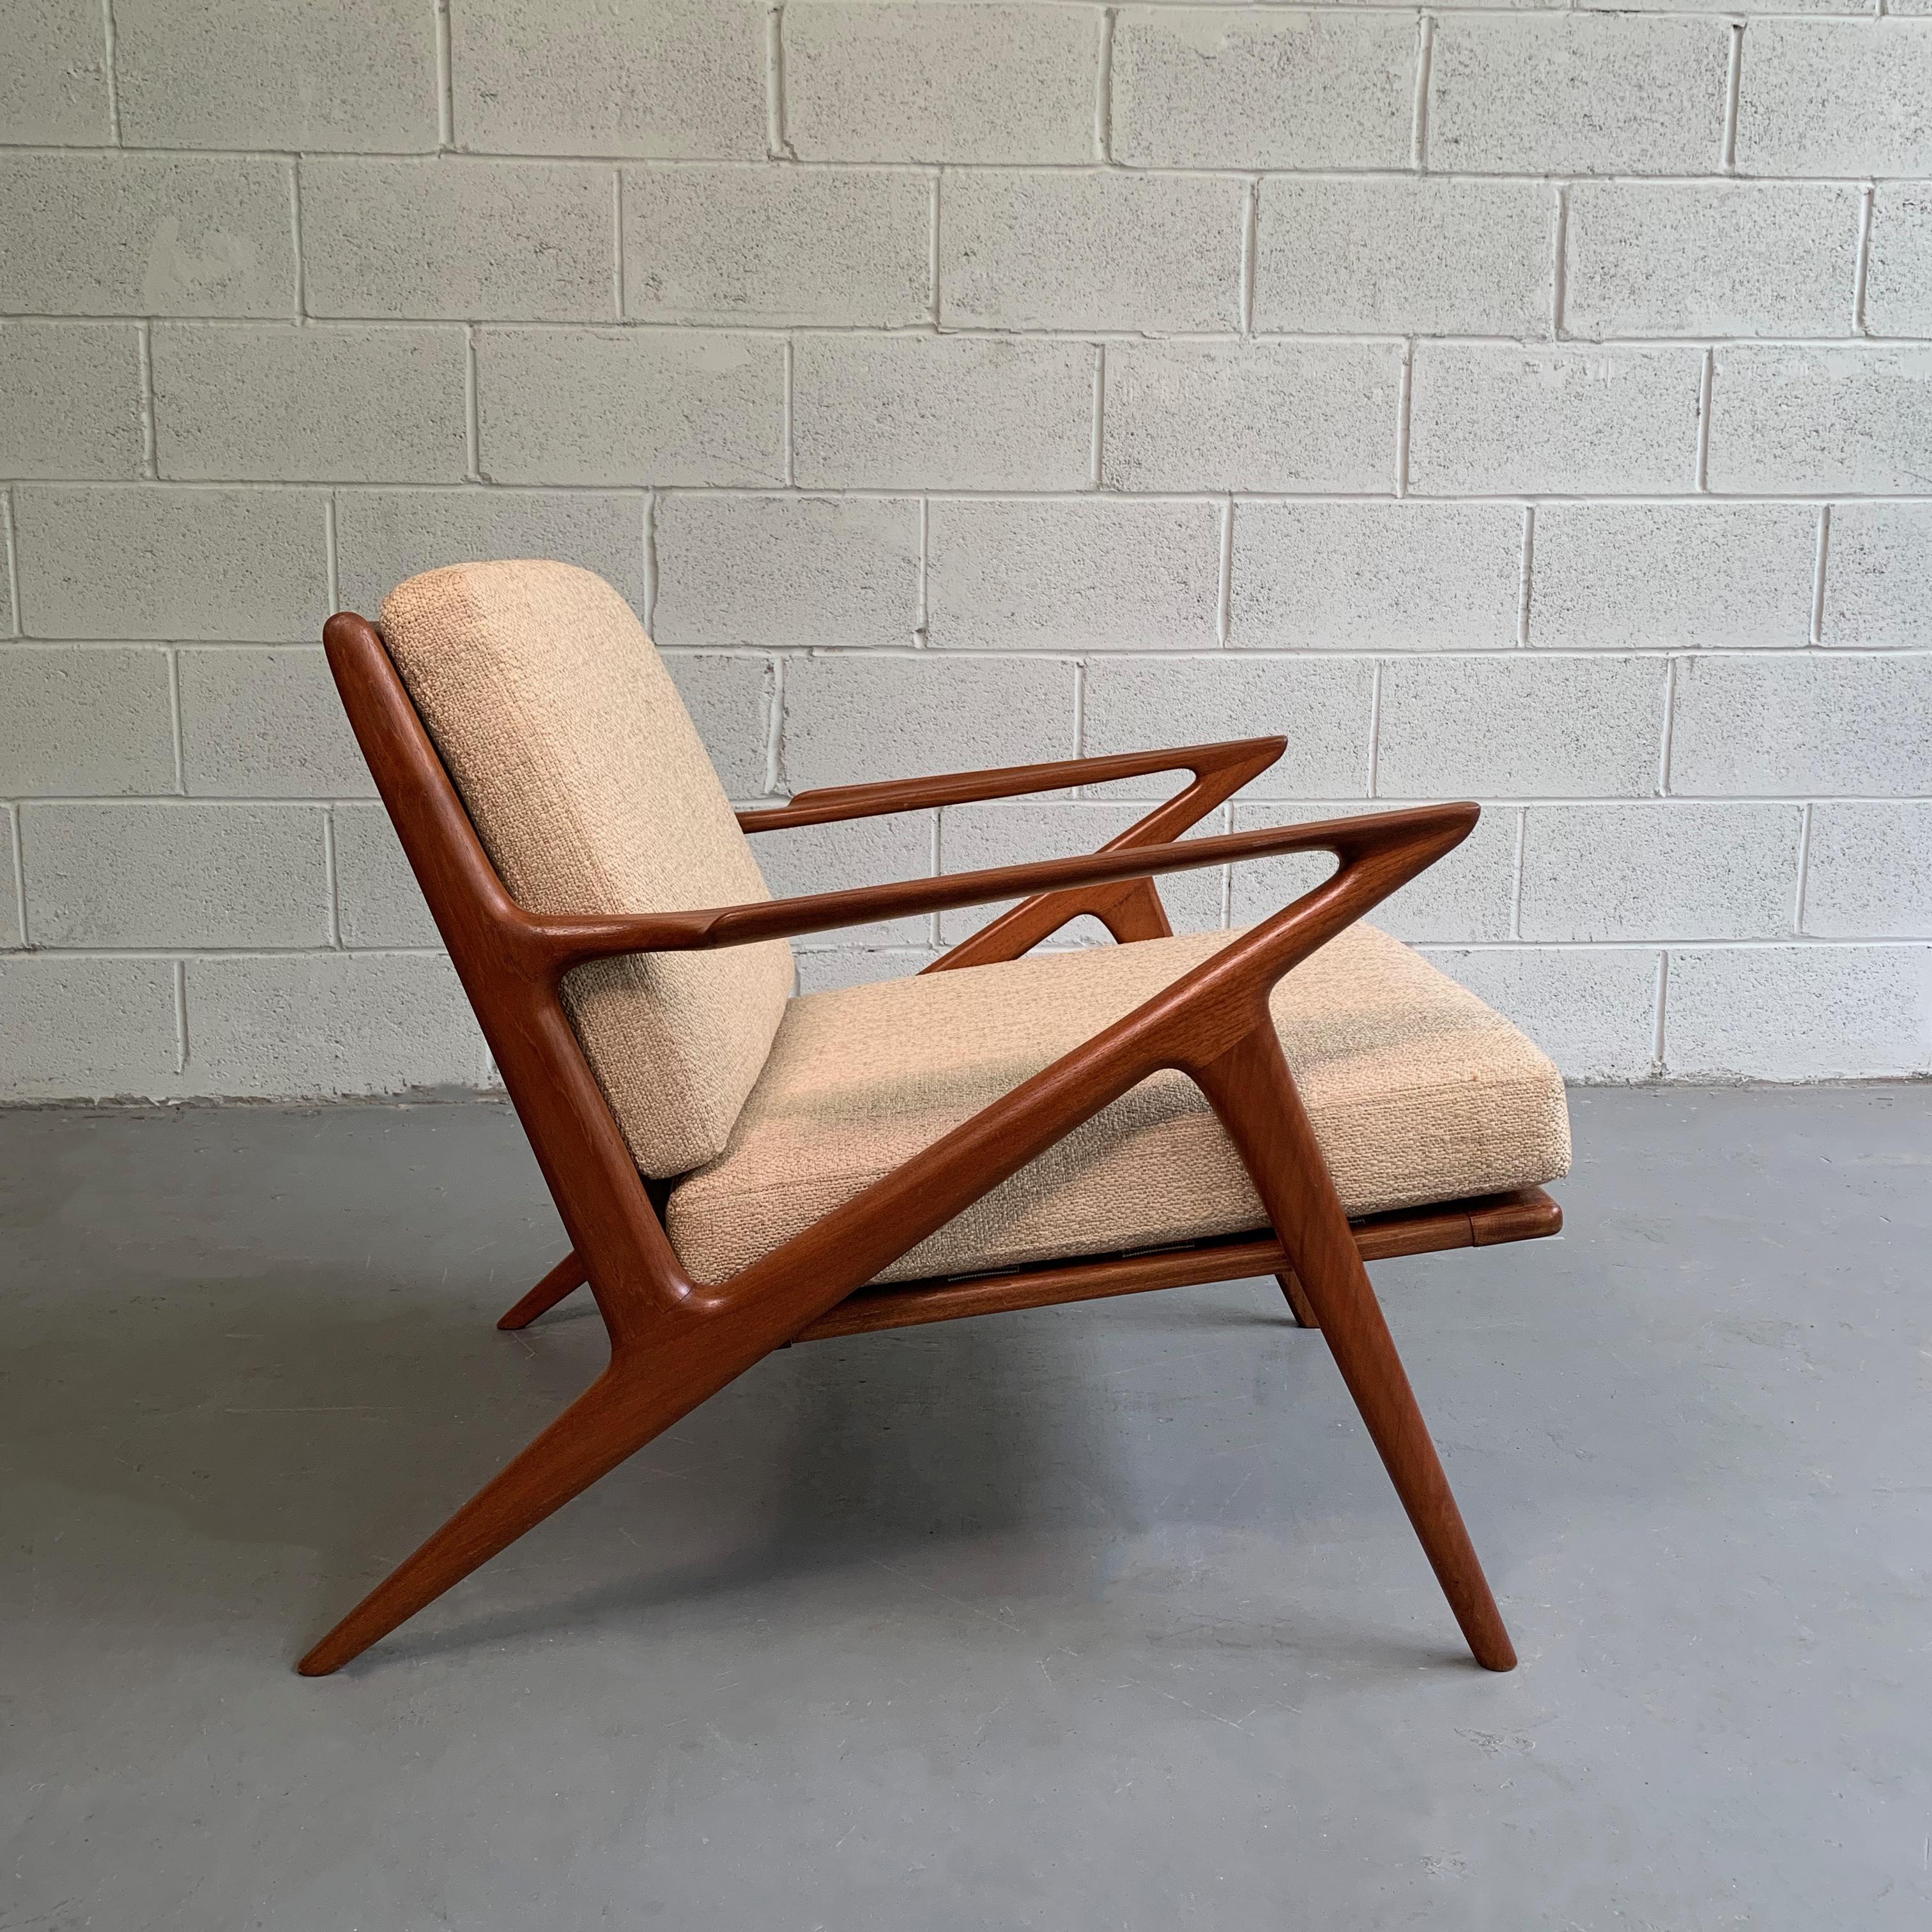 Classic, Danish Modern, slat-back, Z lounge chair by Poul Jensen, Denmark has a newly refinished teak frame and oatmeal cotton blend upholstered seat and back.